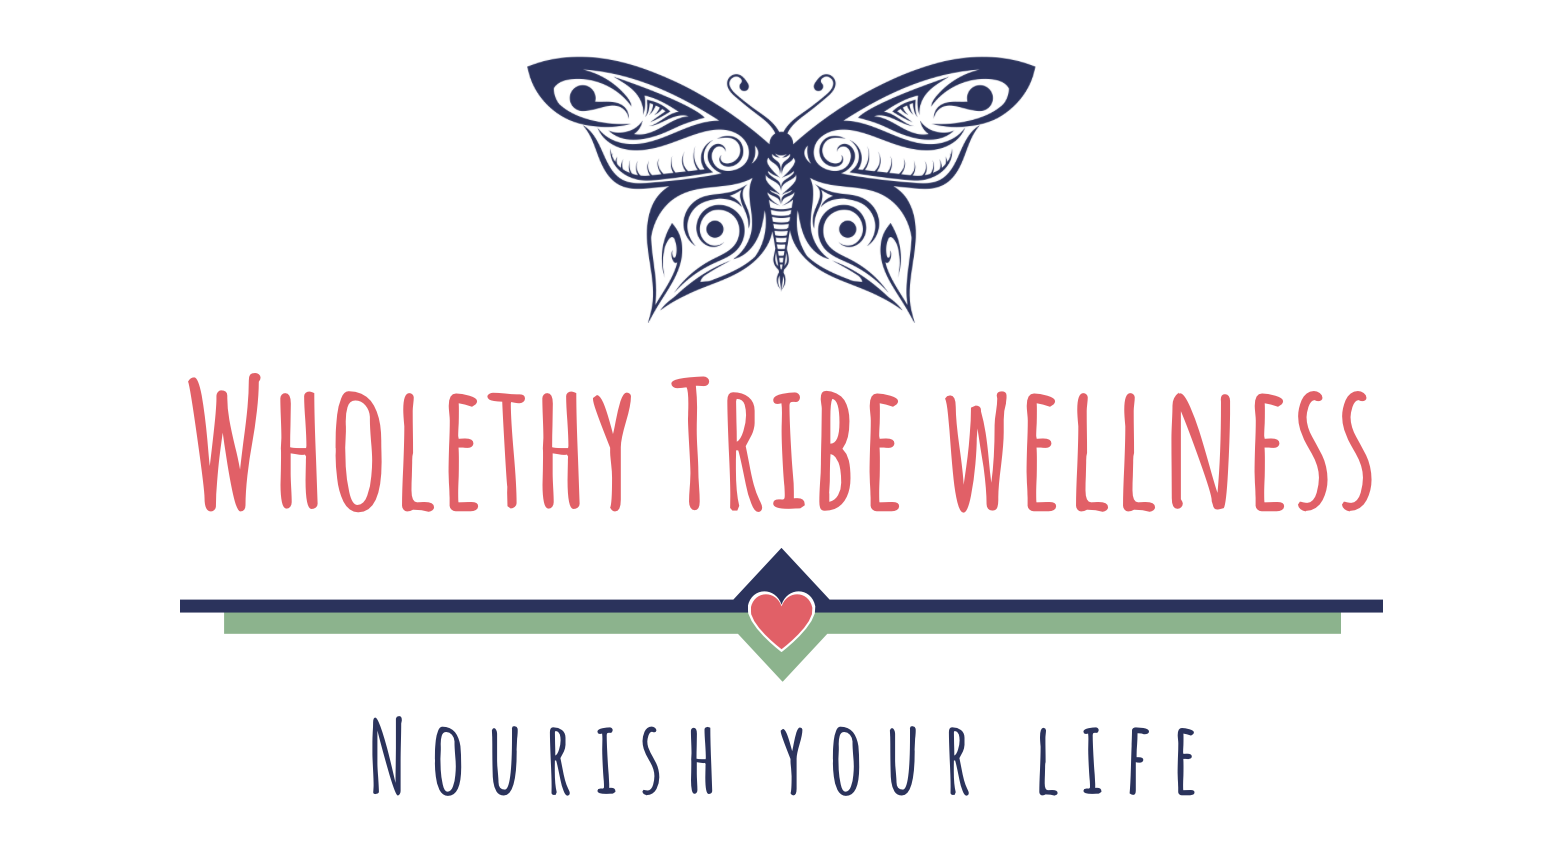 Wholethy Tribe